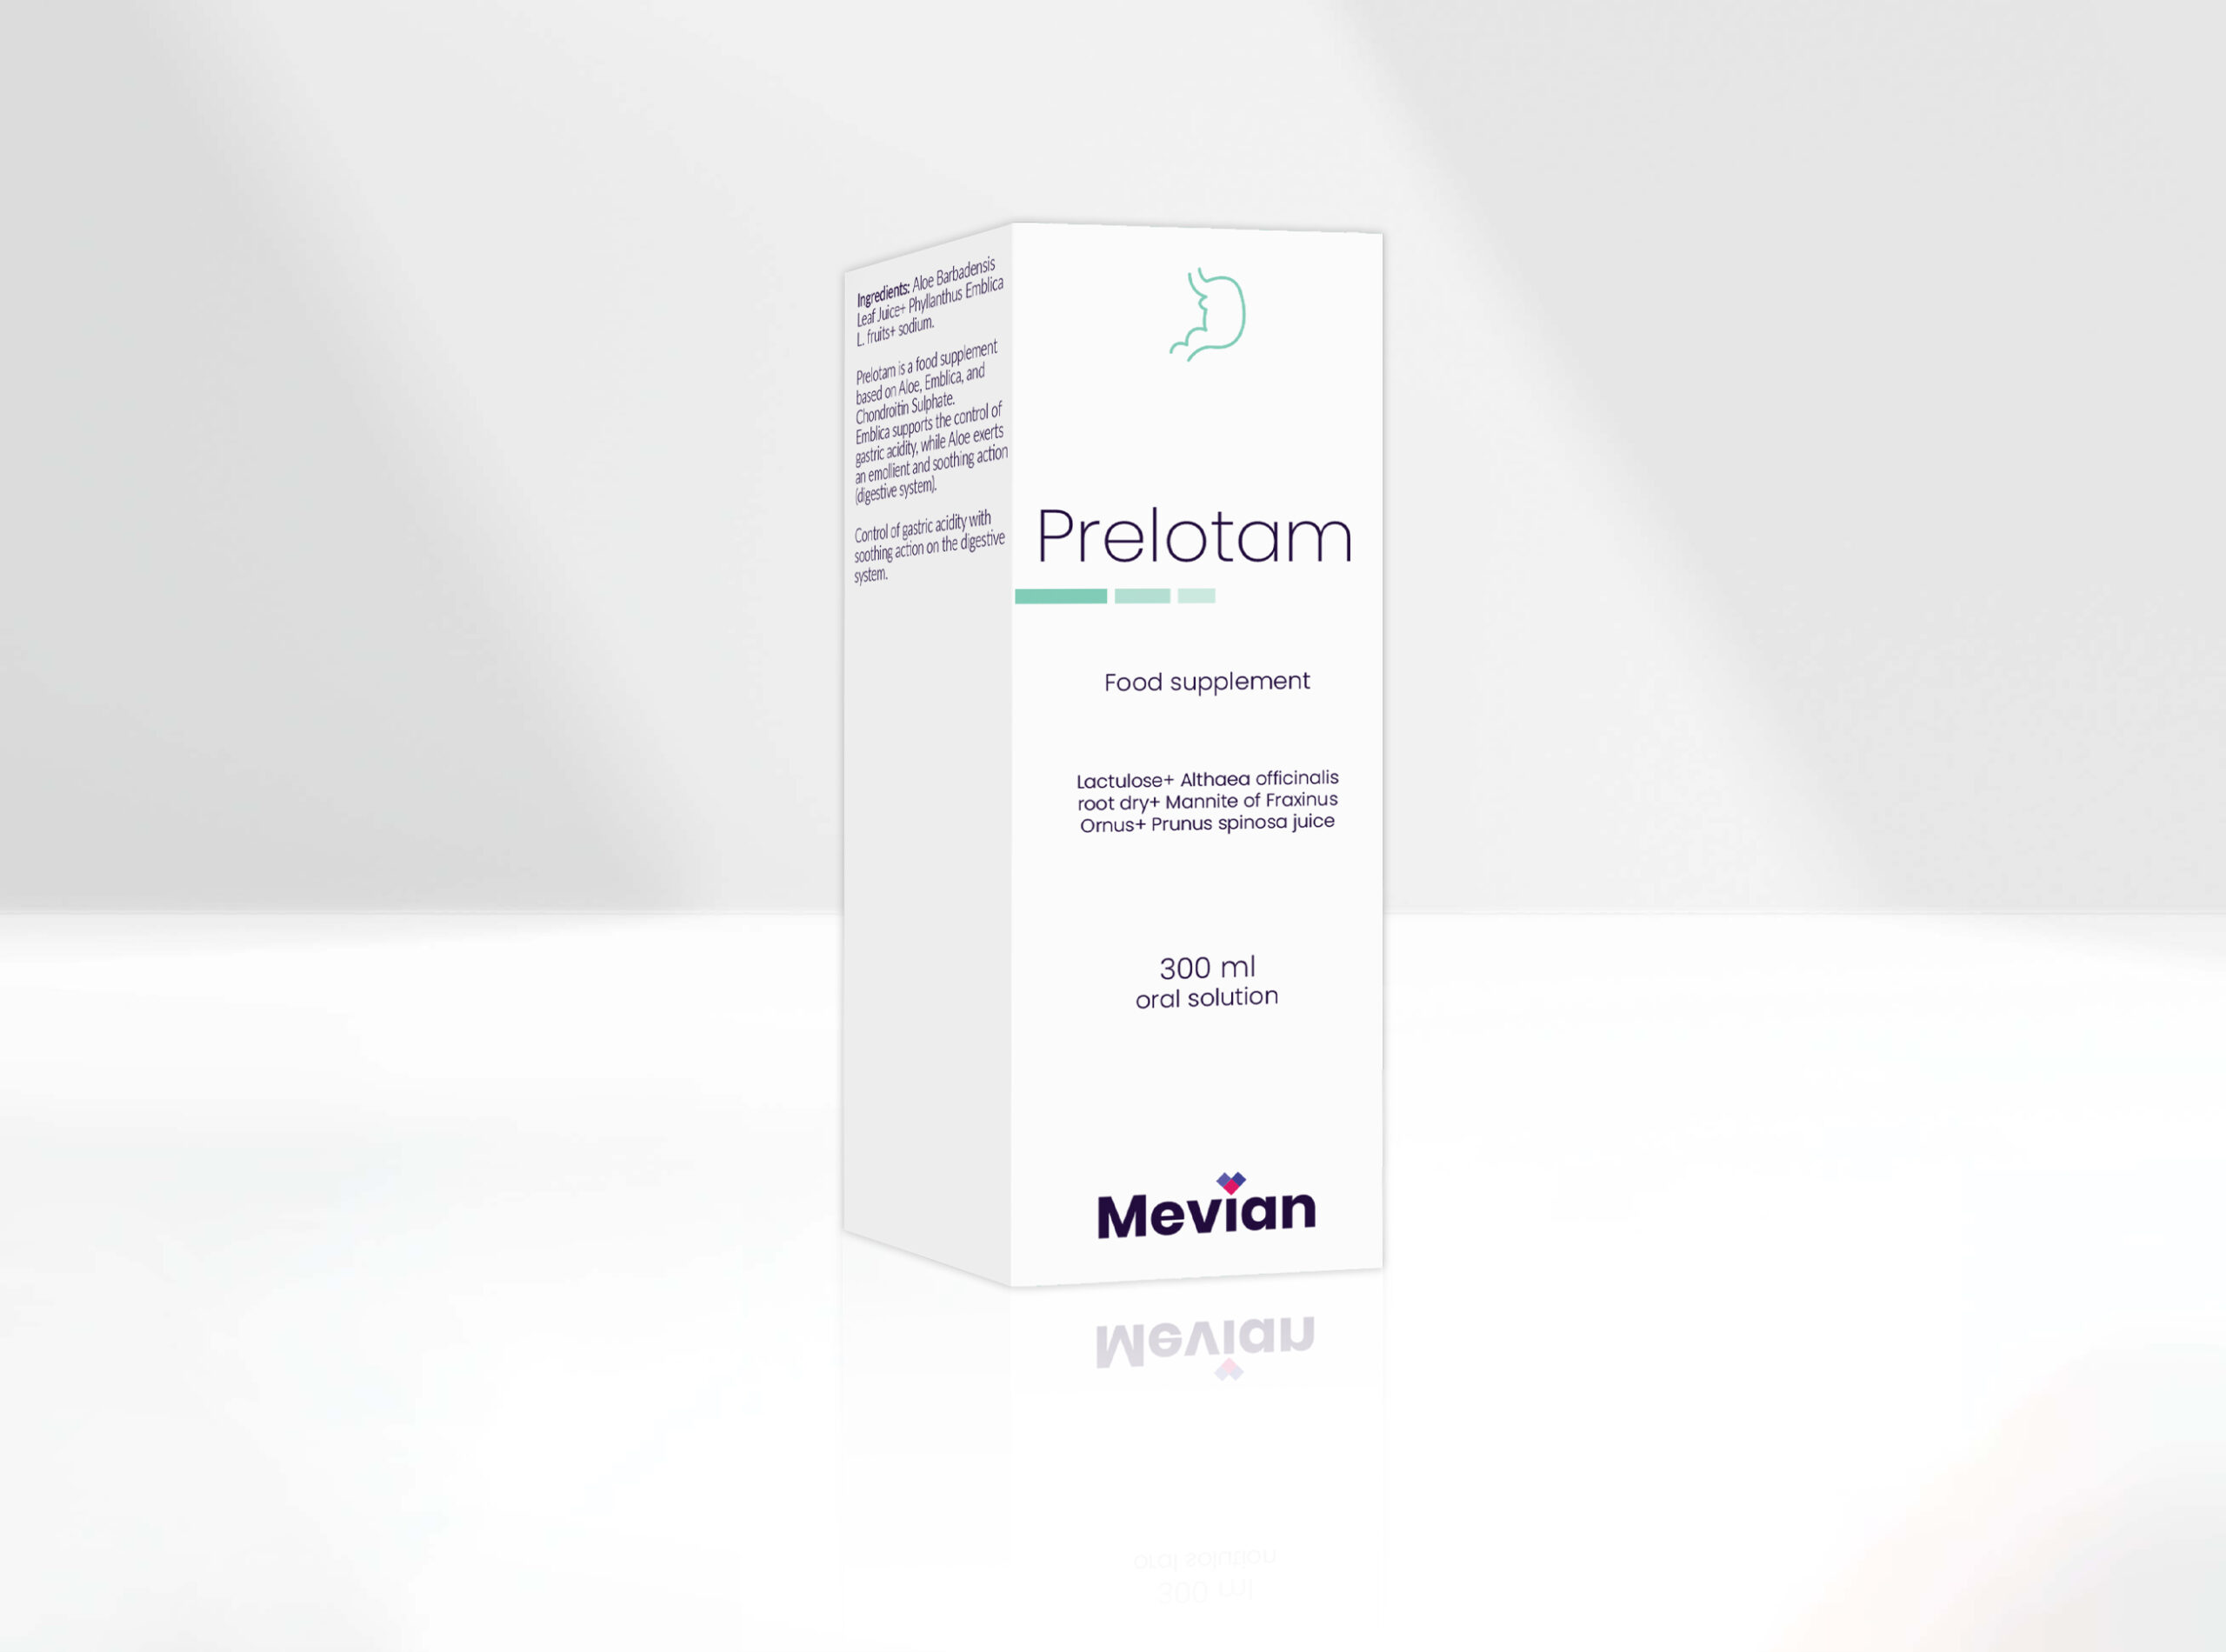 Prelotam is ideal for controlling gastric acidity with soothing action on the digestive system.